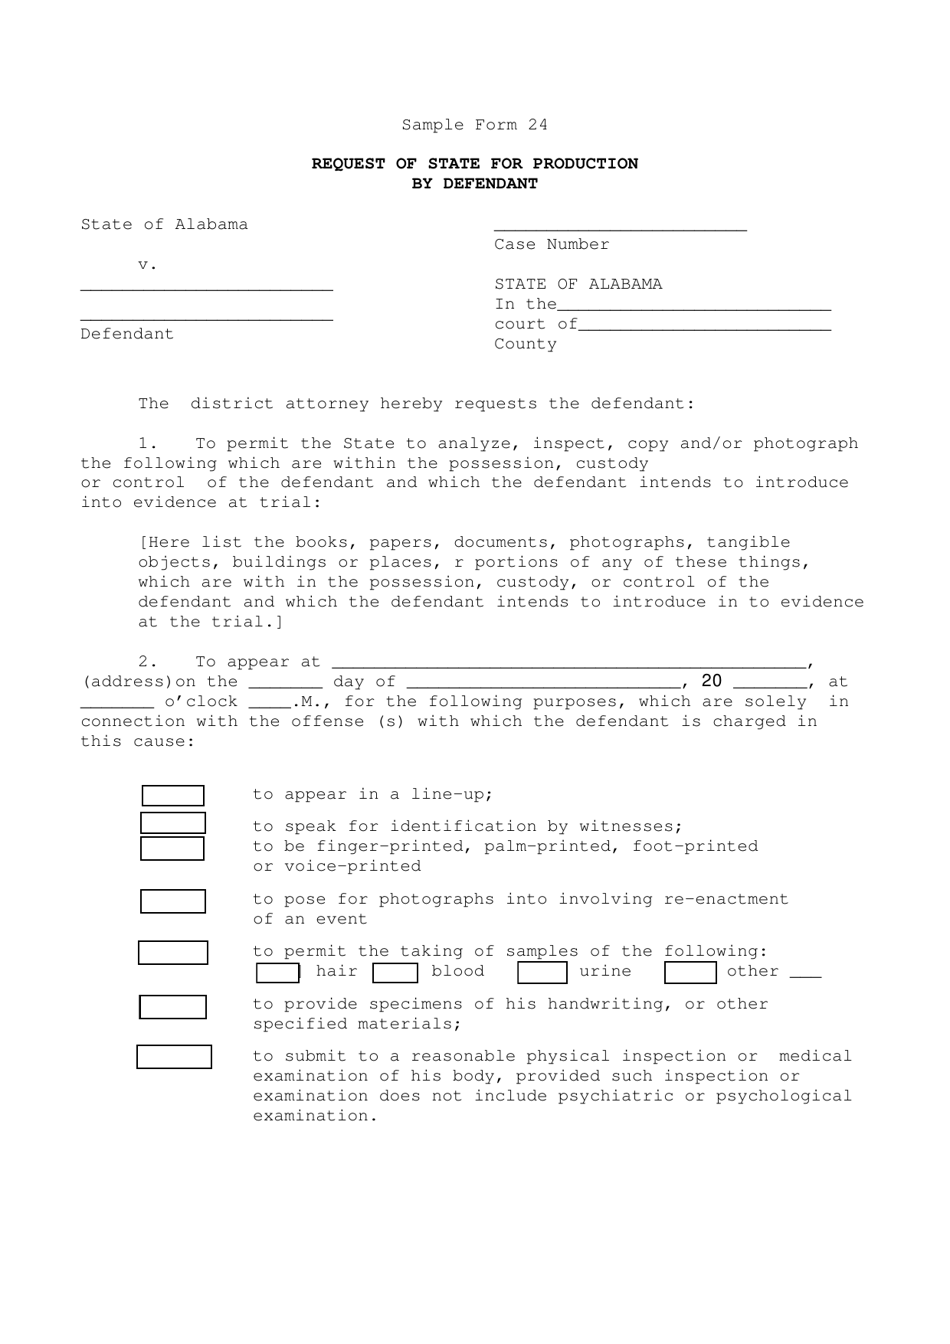 Sample Form 24 Request of State for Production by Defendant - Alabama, Page 1